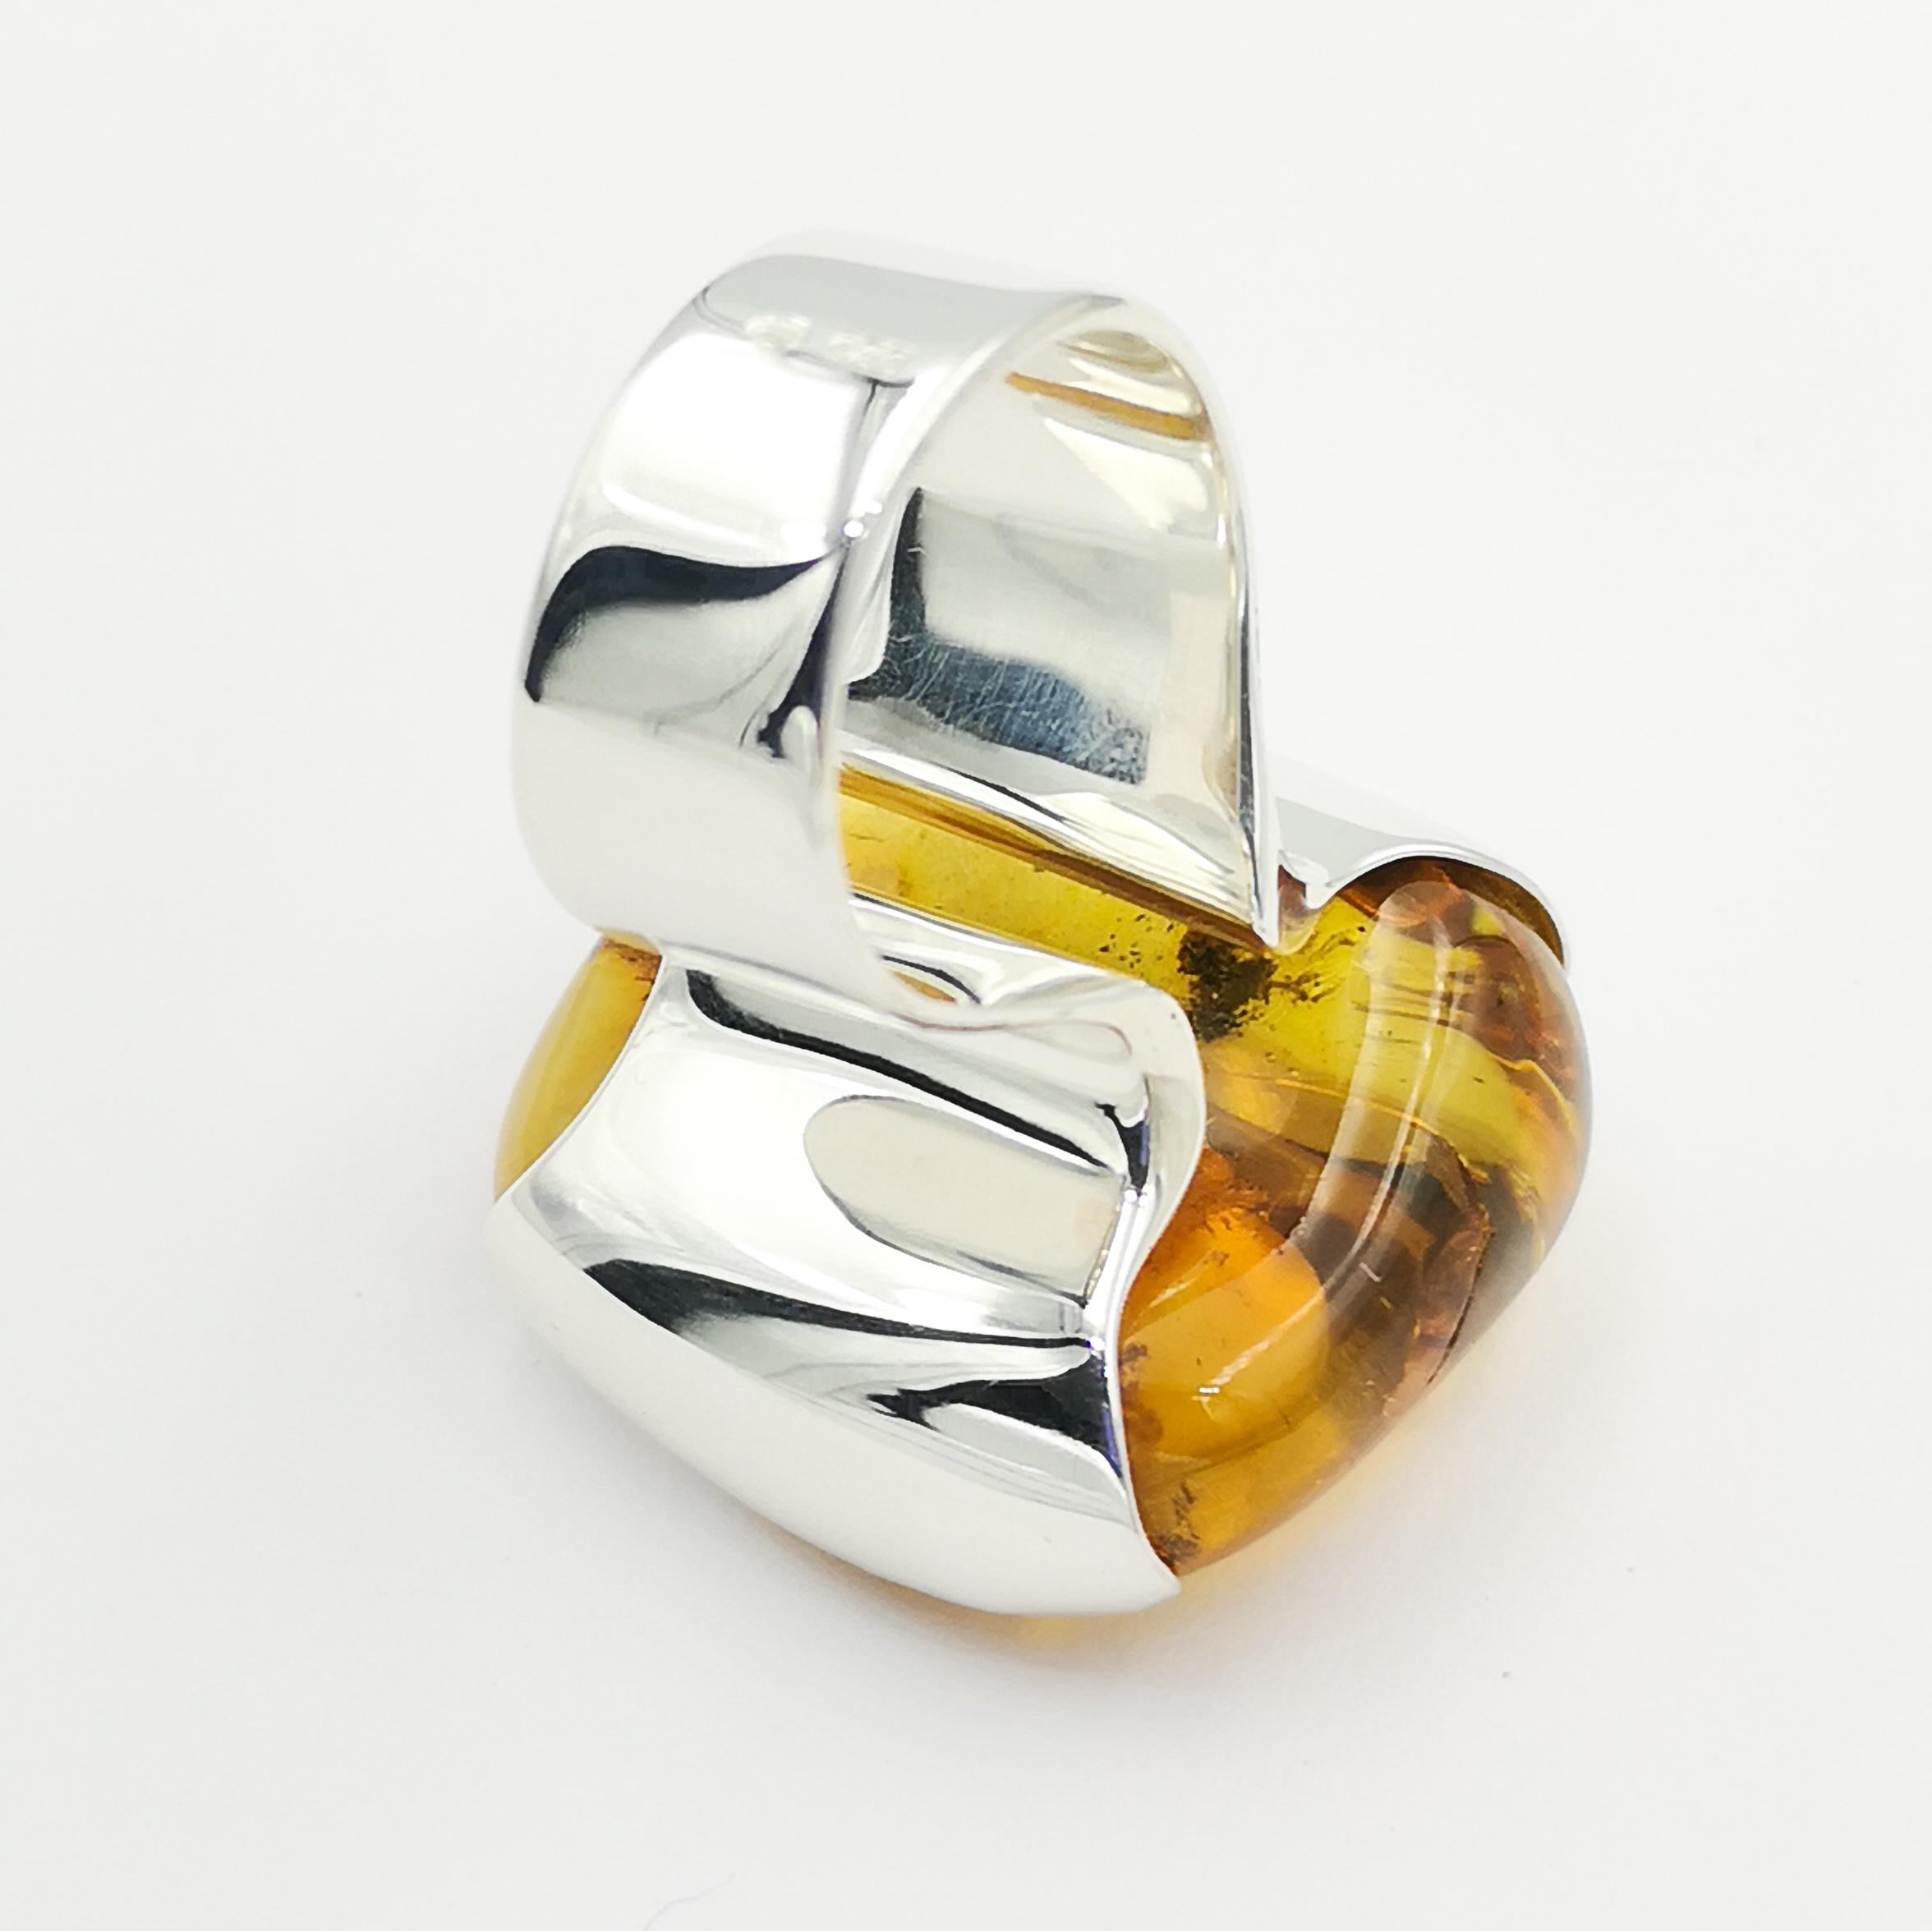 Uncut Natural Baltic Amber Silver Ring Artist Hand Made Design Rings For Sale